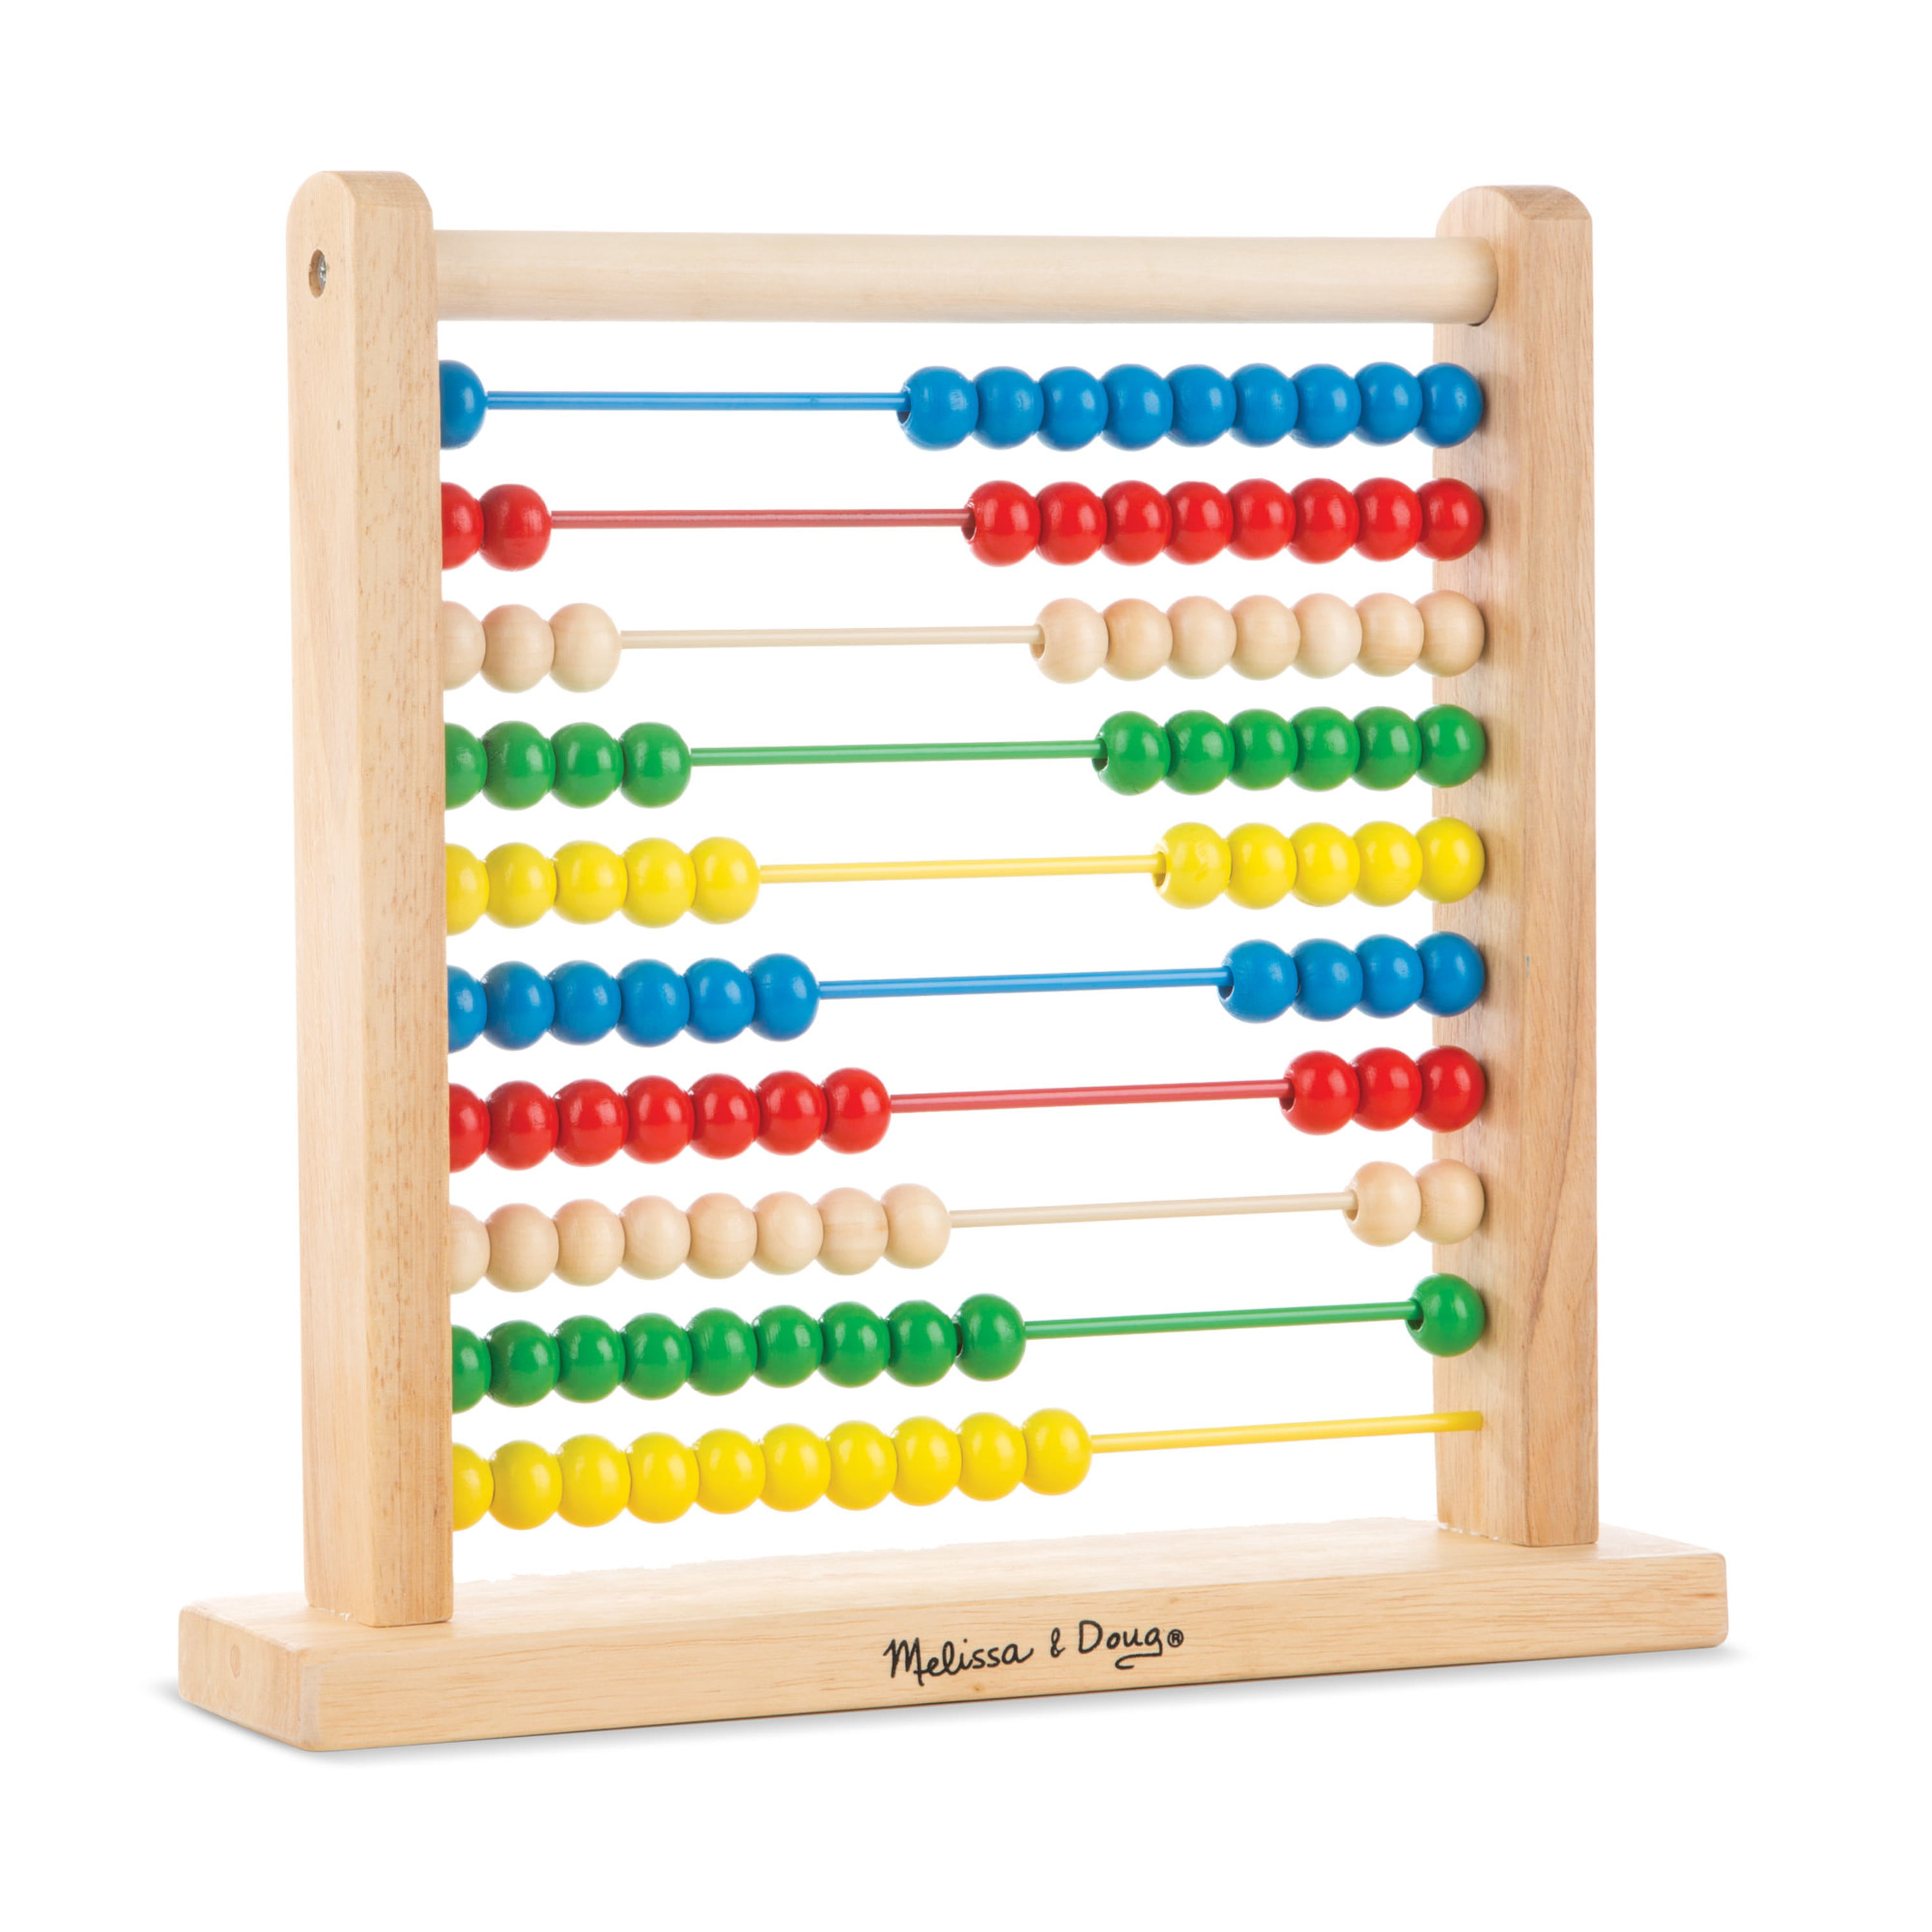 WOODEN ABACUS TRADITIONAL COLOURFUL CHILDRENS TOY CLASSIC LEARNING COUNTING ED 